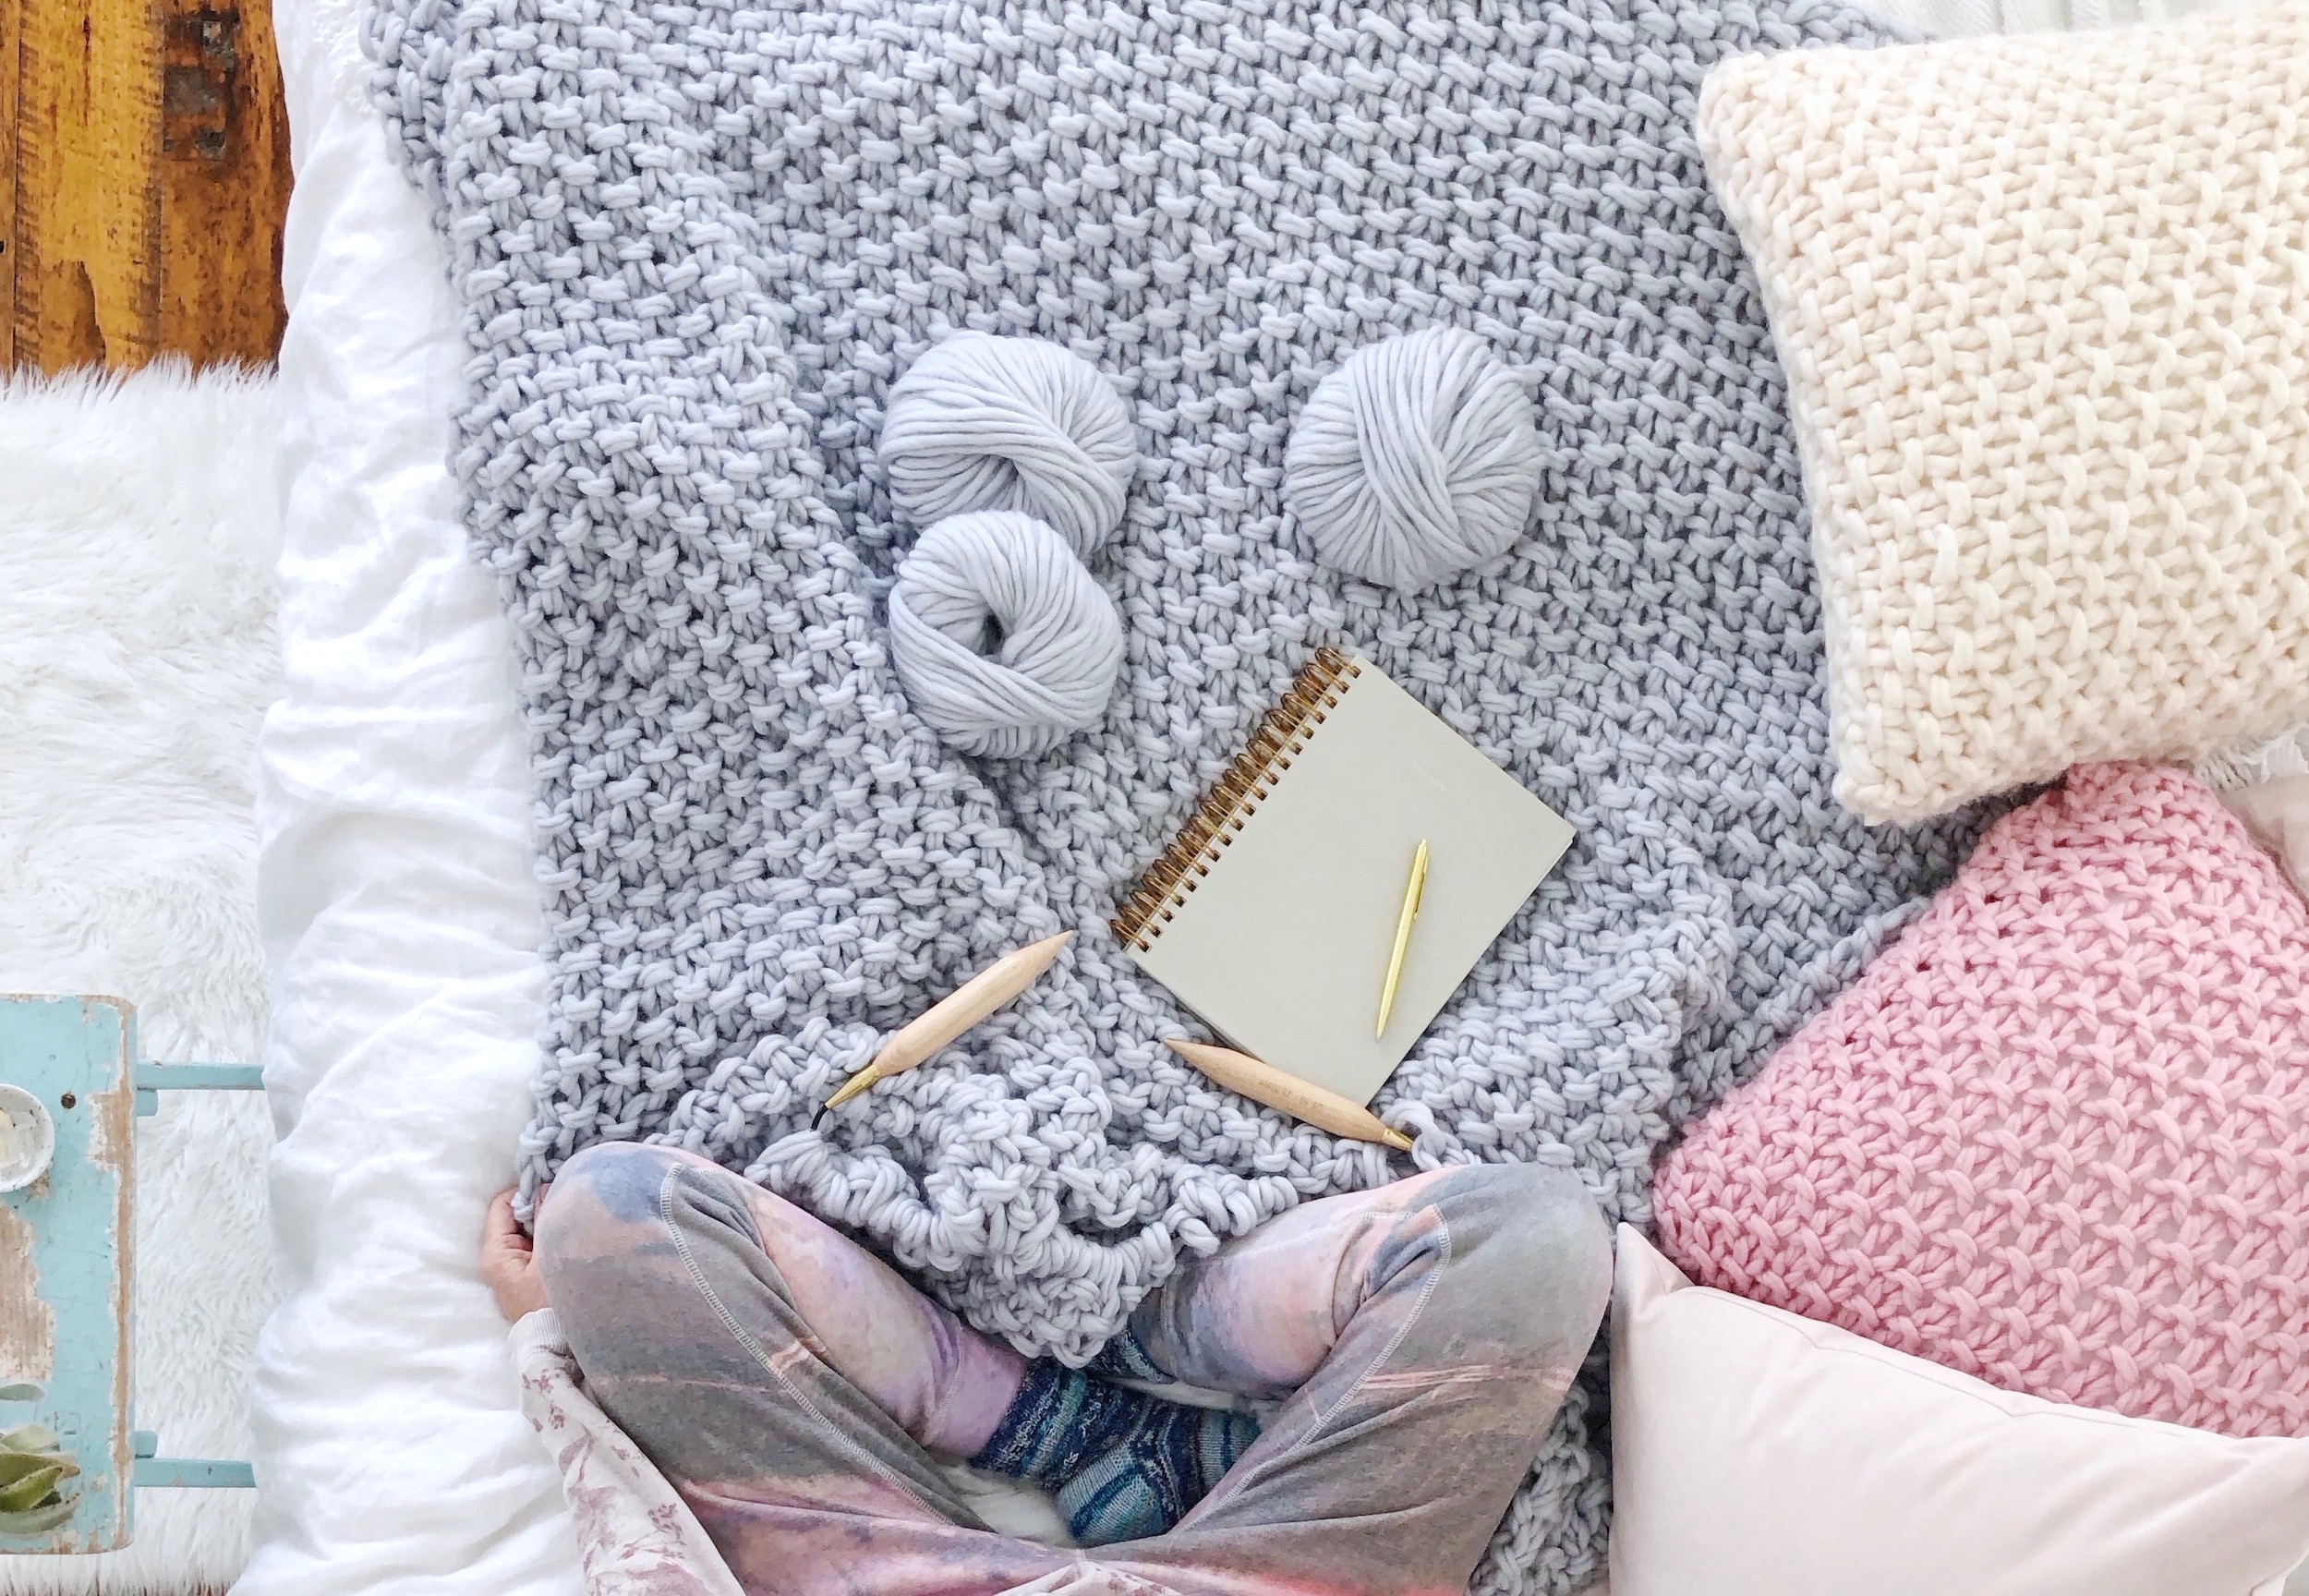 Knit your own chunky knit blanket ! Fabulous patterns, wool, knitting needles and chunky knit blanket kits via Lynne Knowlton | DESIGN THE LIFE YOU WANT TO LIVE 